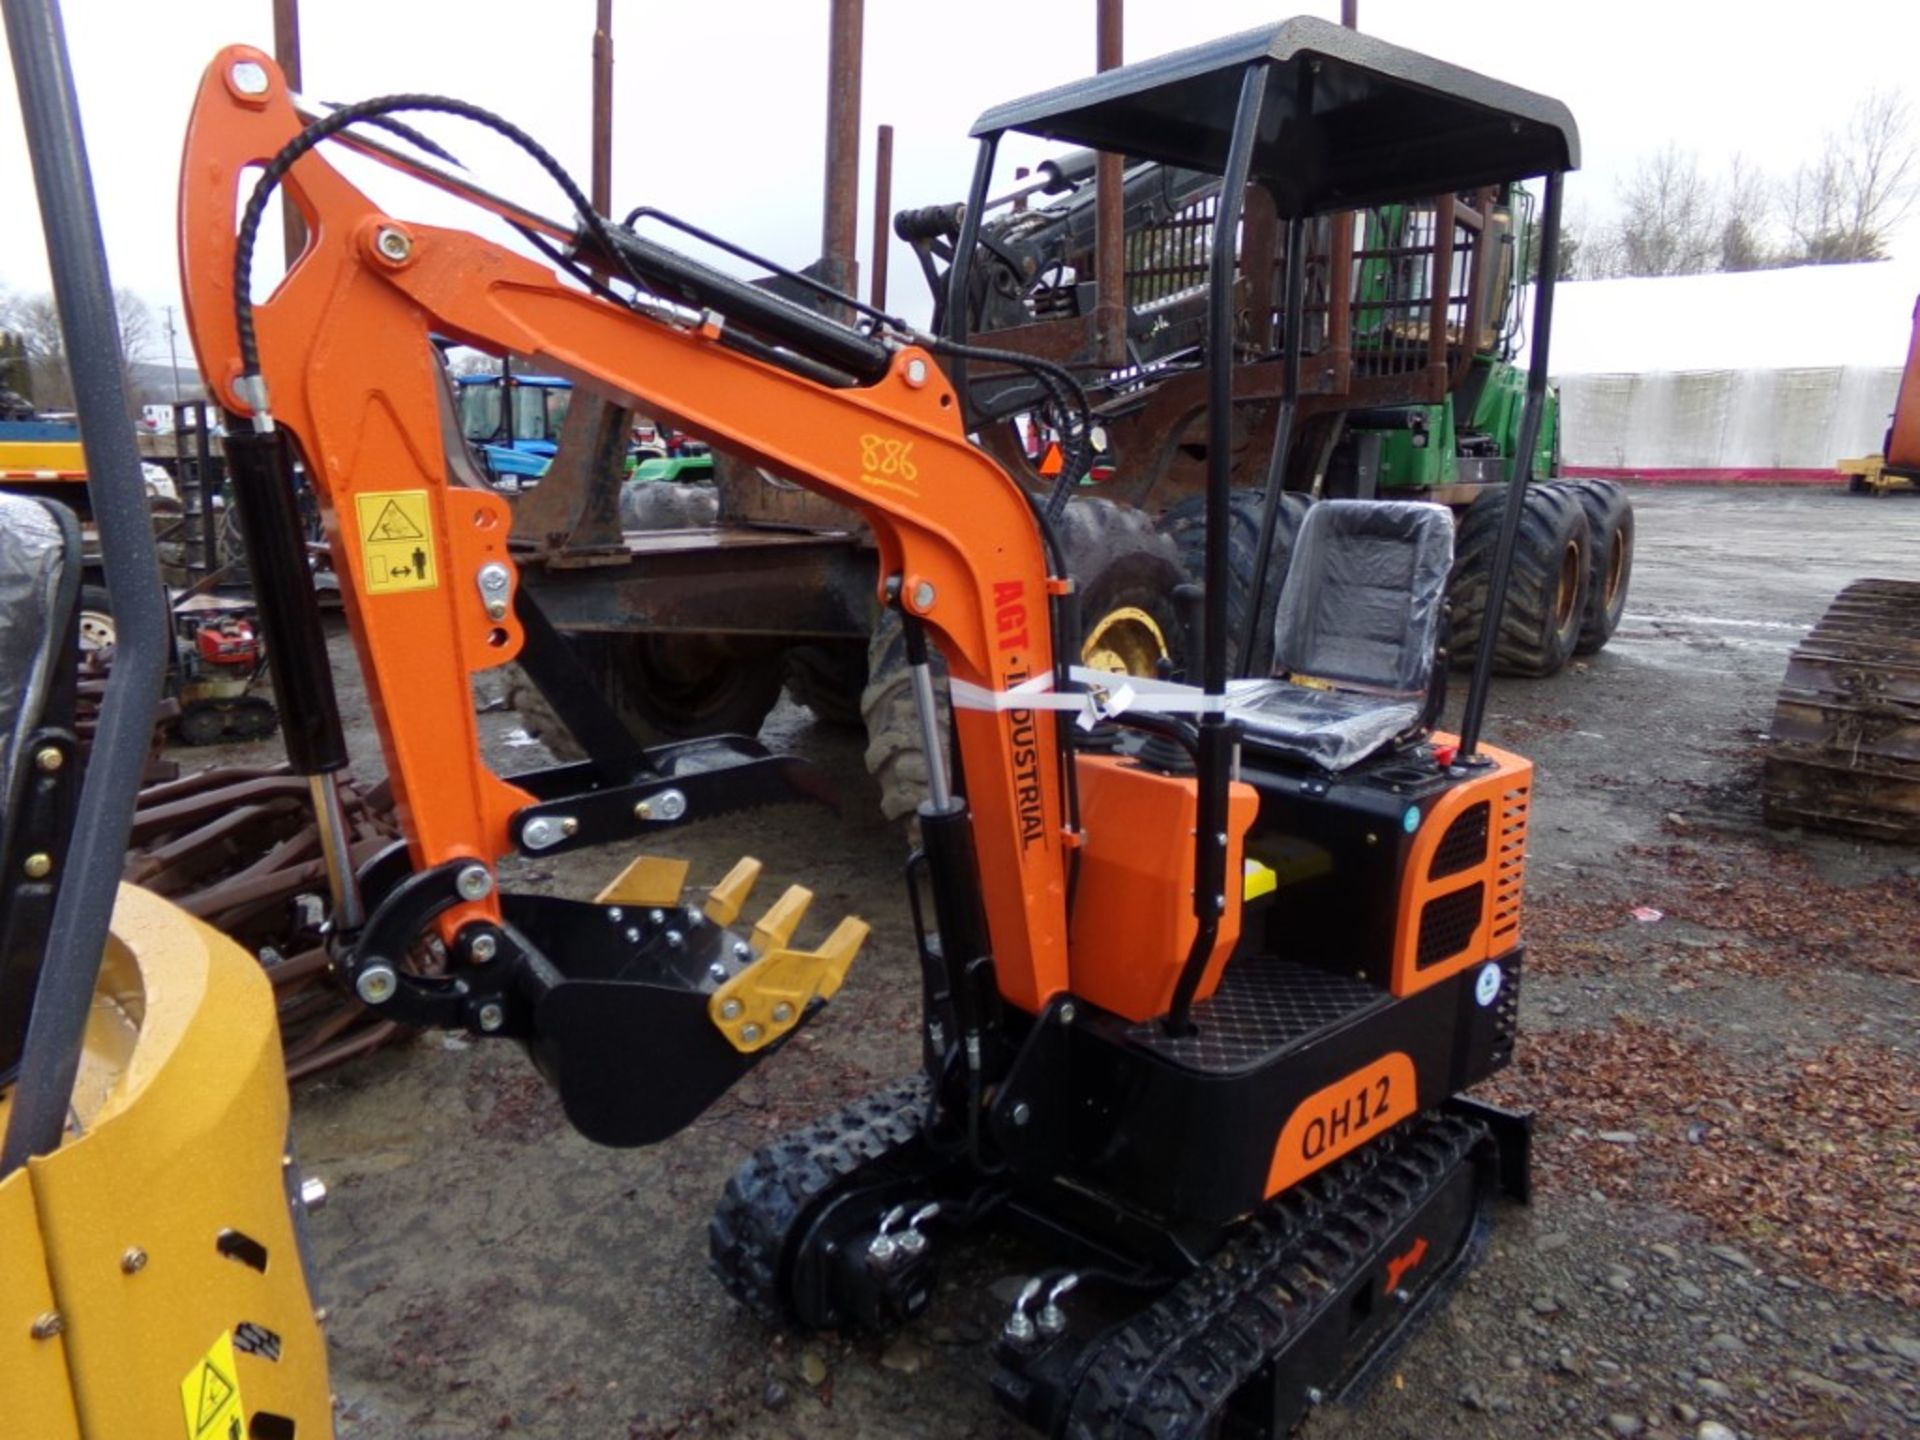 New AGT Industrial QH12 Mini Excavator with Grader Blade, Stationary Thumb, Briggs Gas Engine,